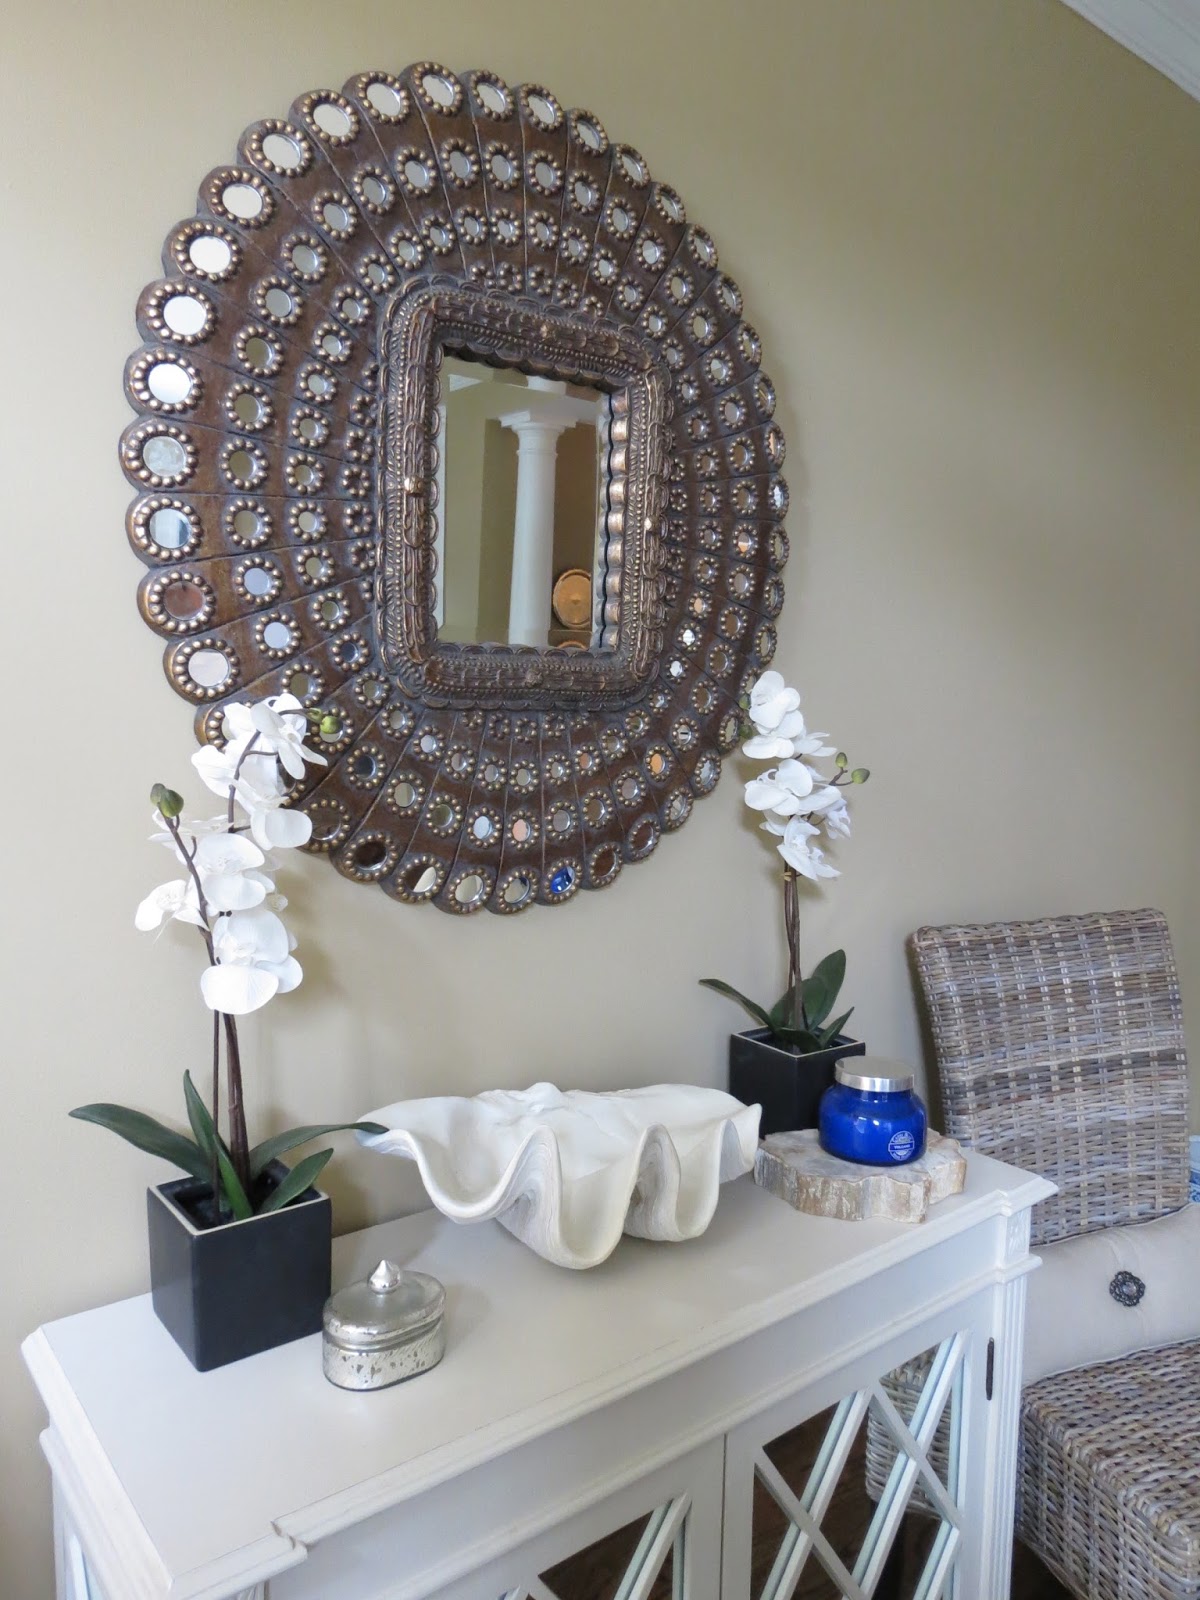 Makeupbytiffanyd A Few Home Decor Updates And Some Fab Kubu Chairs